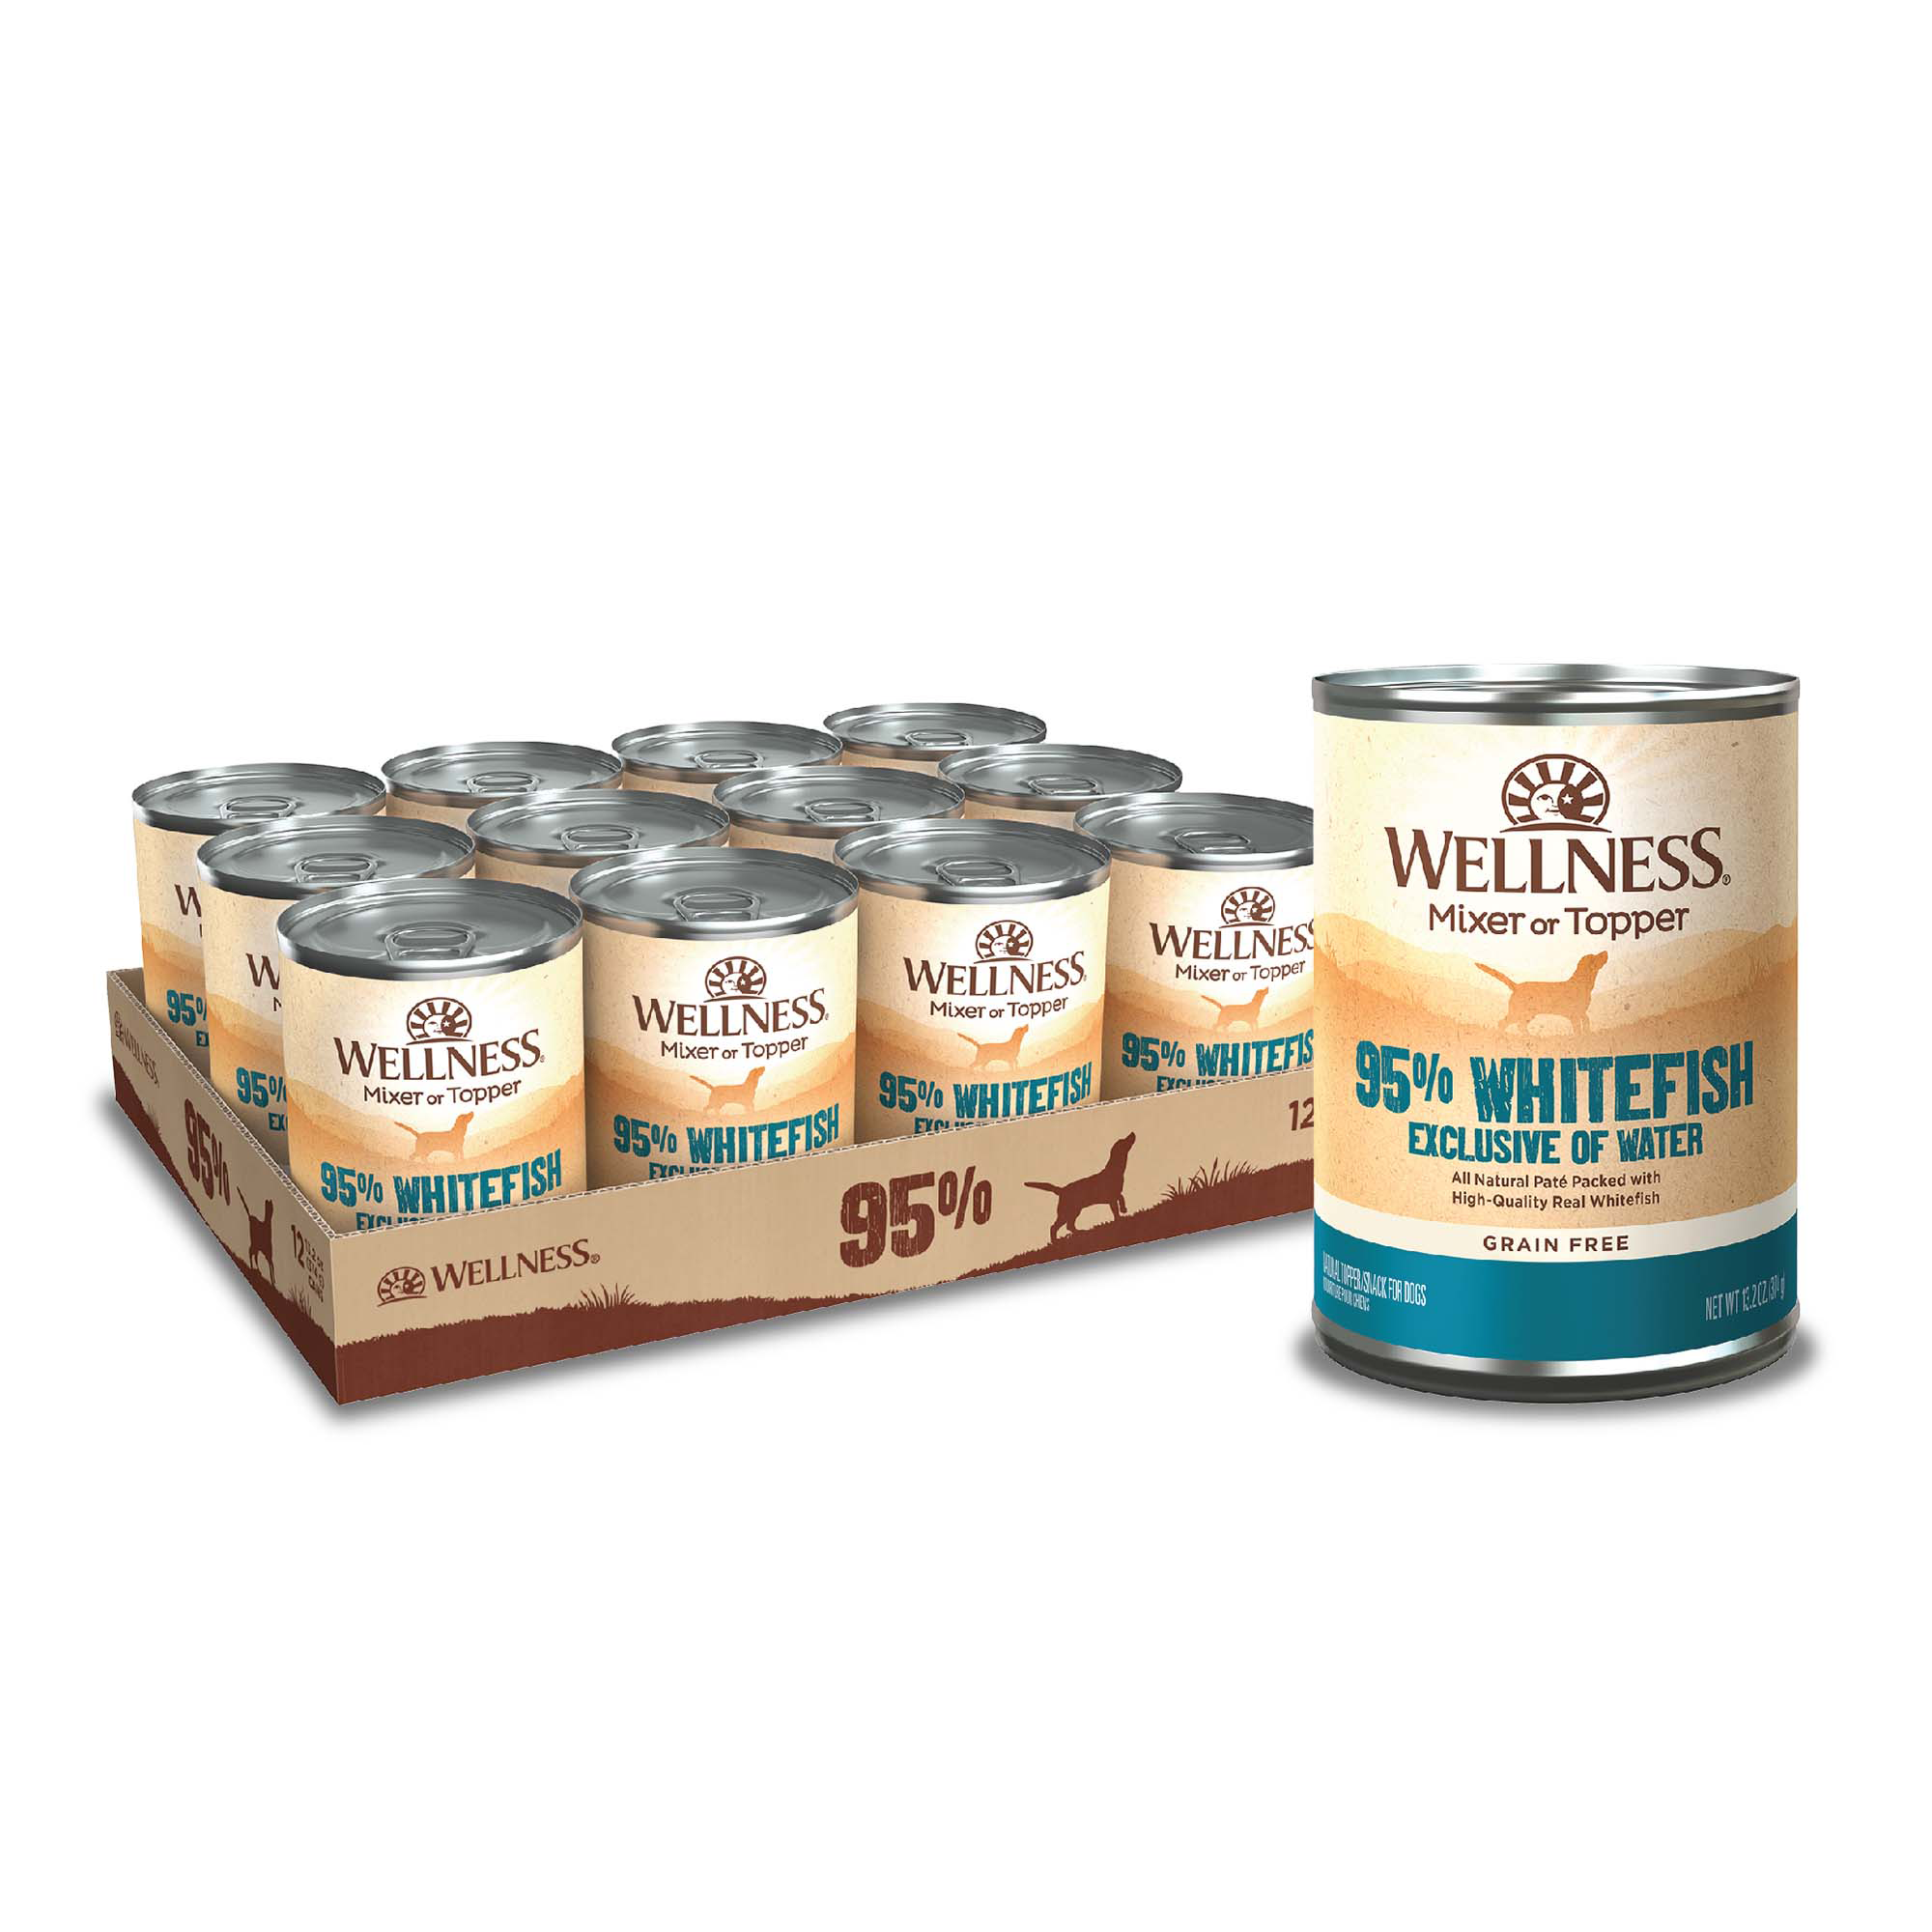 Wellness 95% Whitefish Natural Wet Grain Free Canned Dog Food, 13.2-Ounce Can (Pack of 12) - image 1 of 8